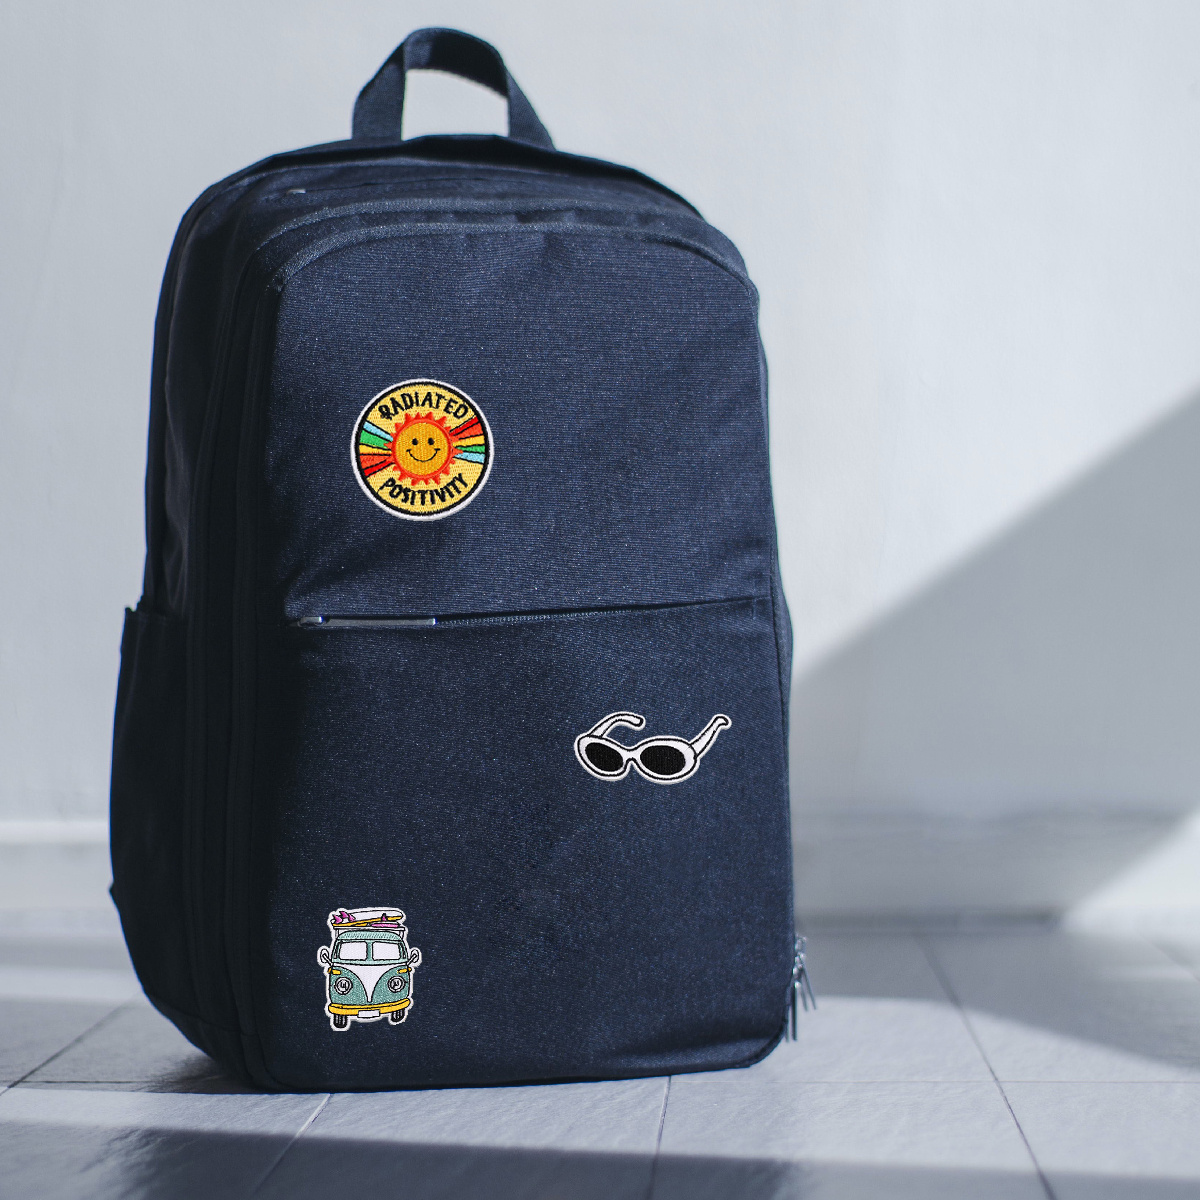 Backpack with Iron-on Patches